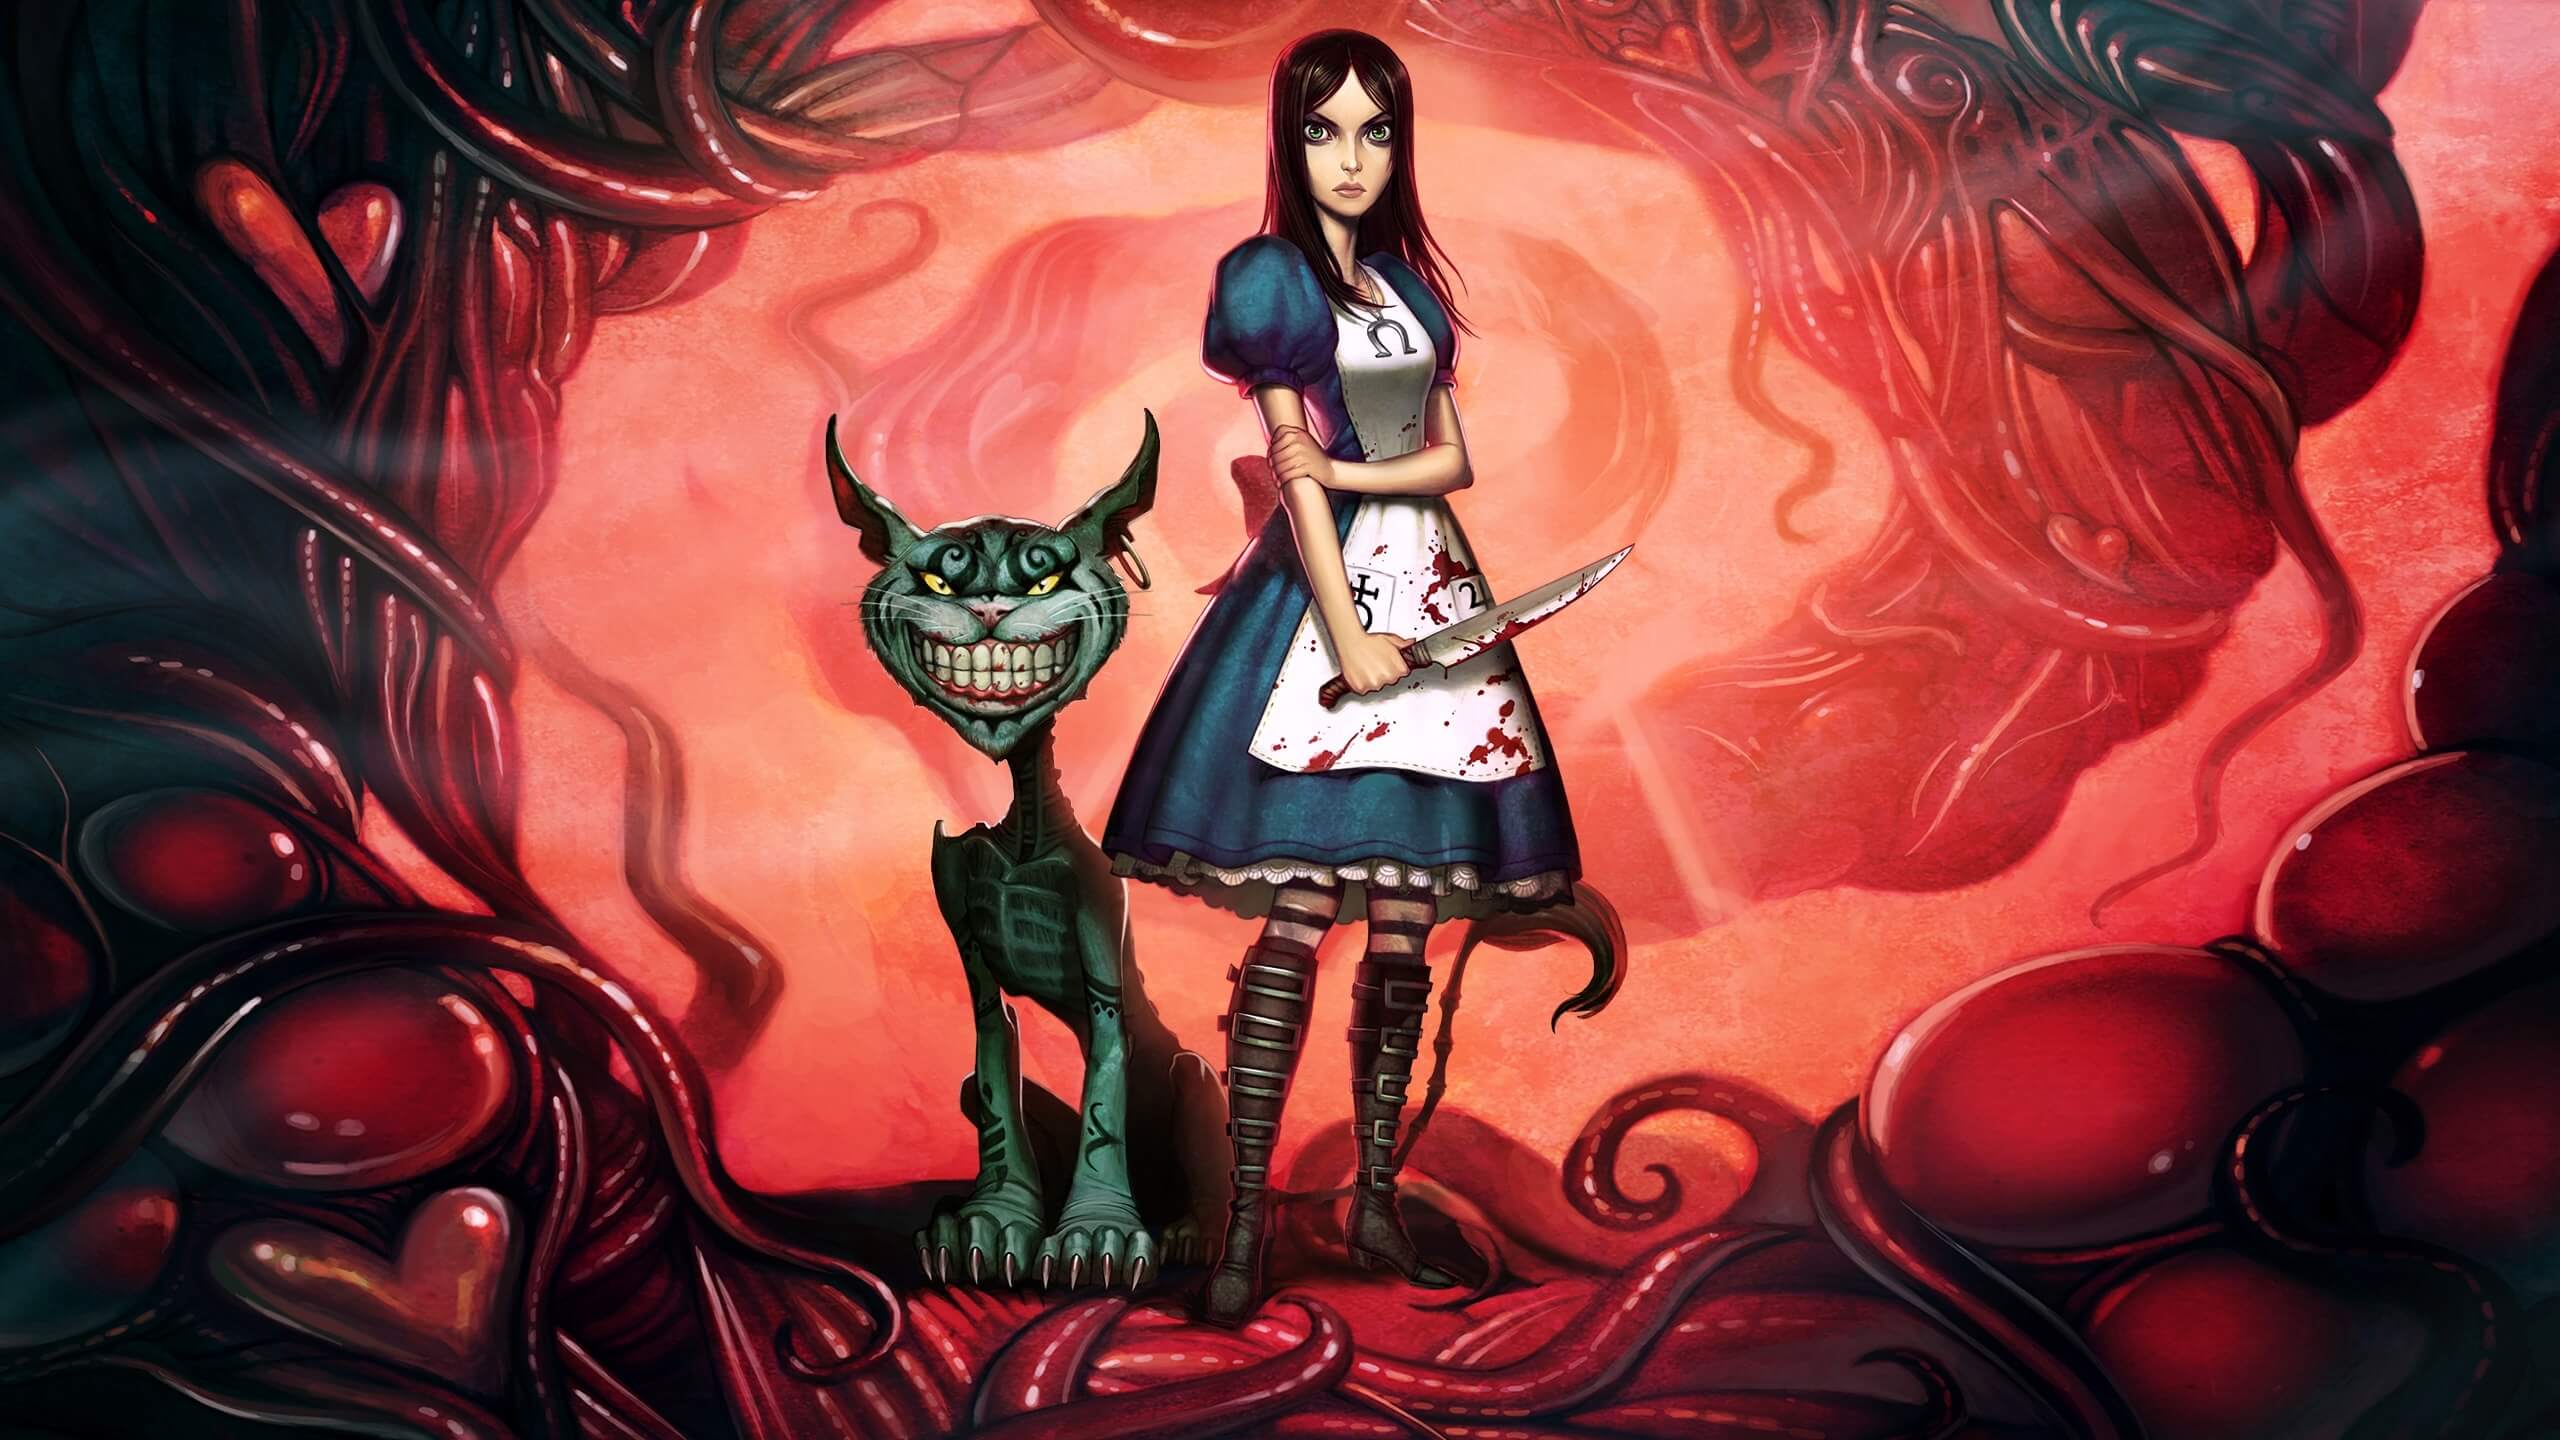 American McGee’s Alice will return as a TV show